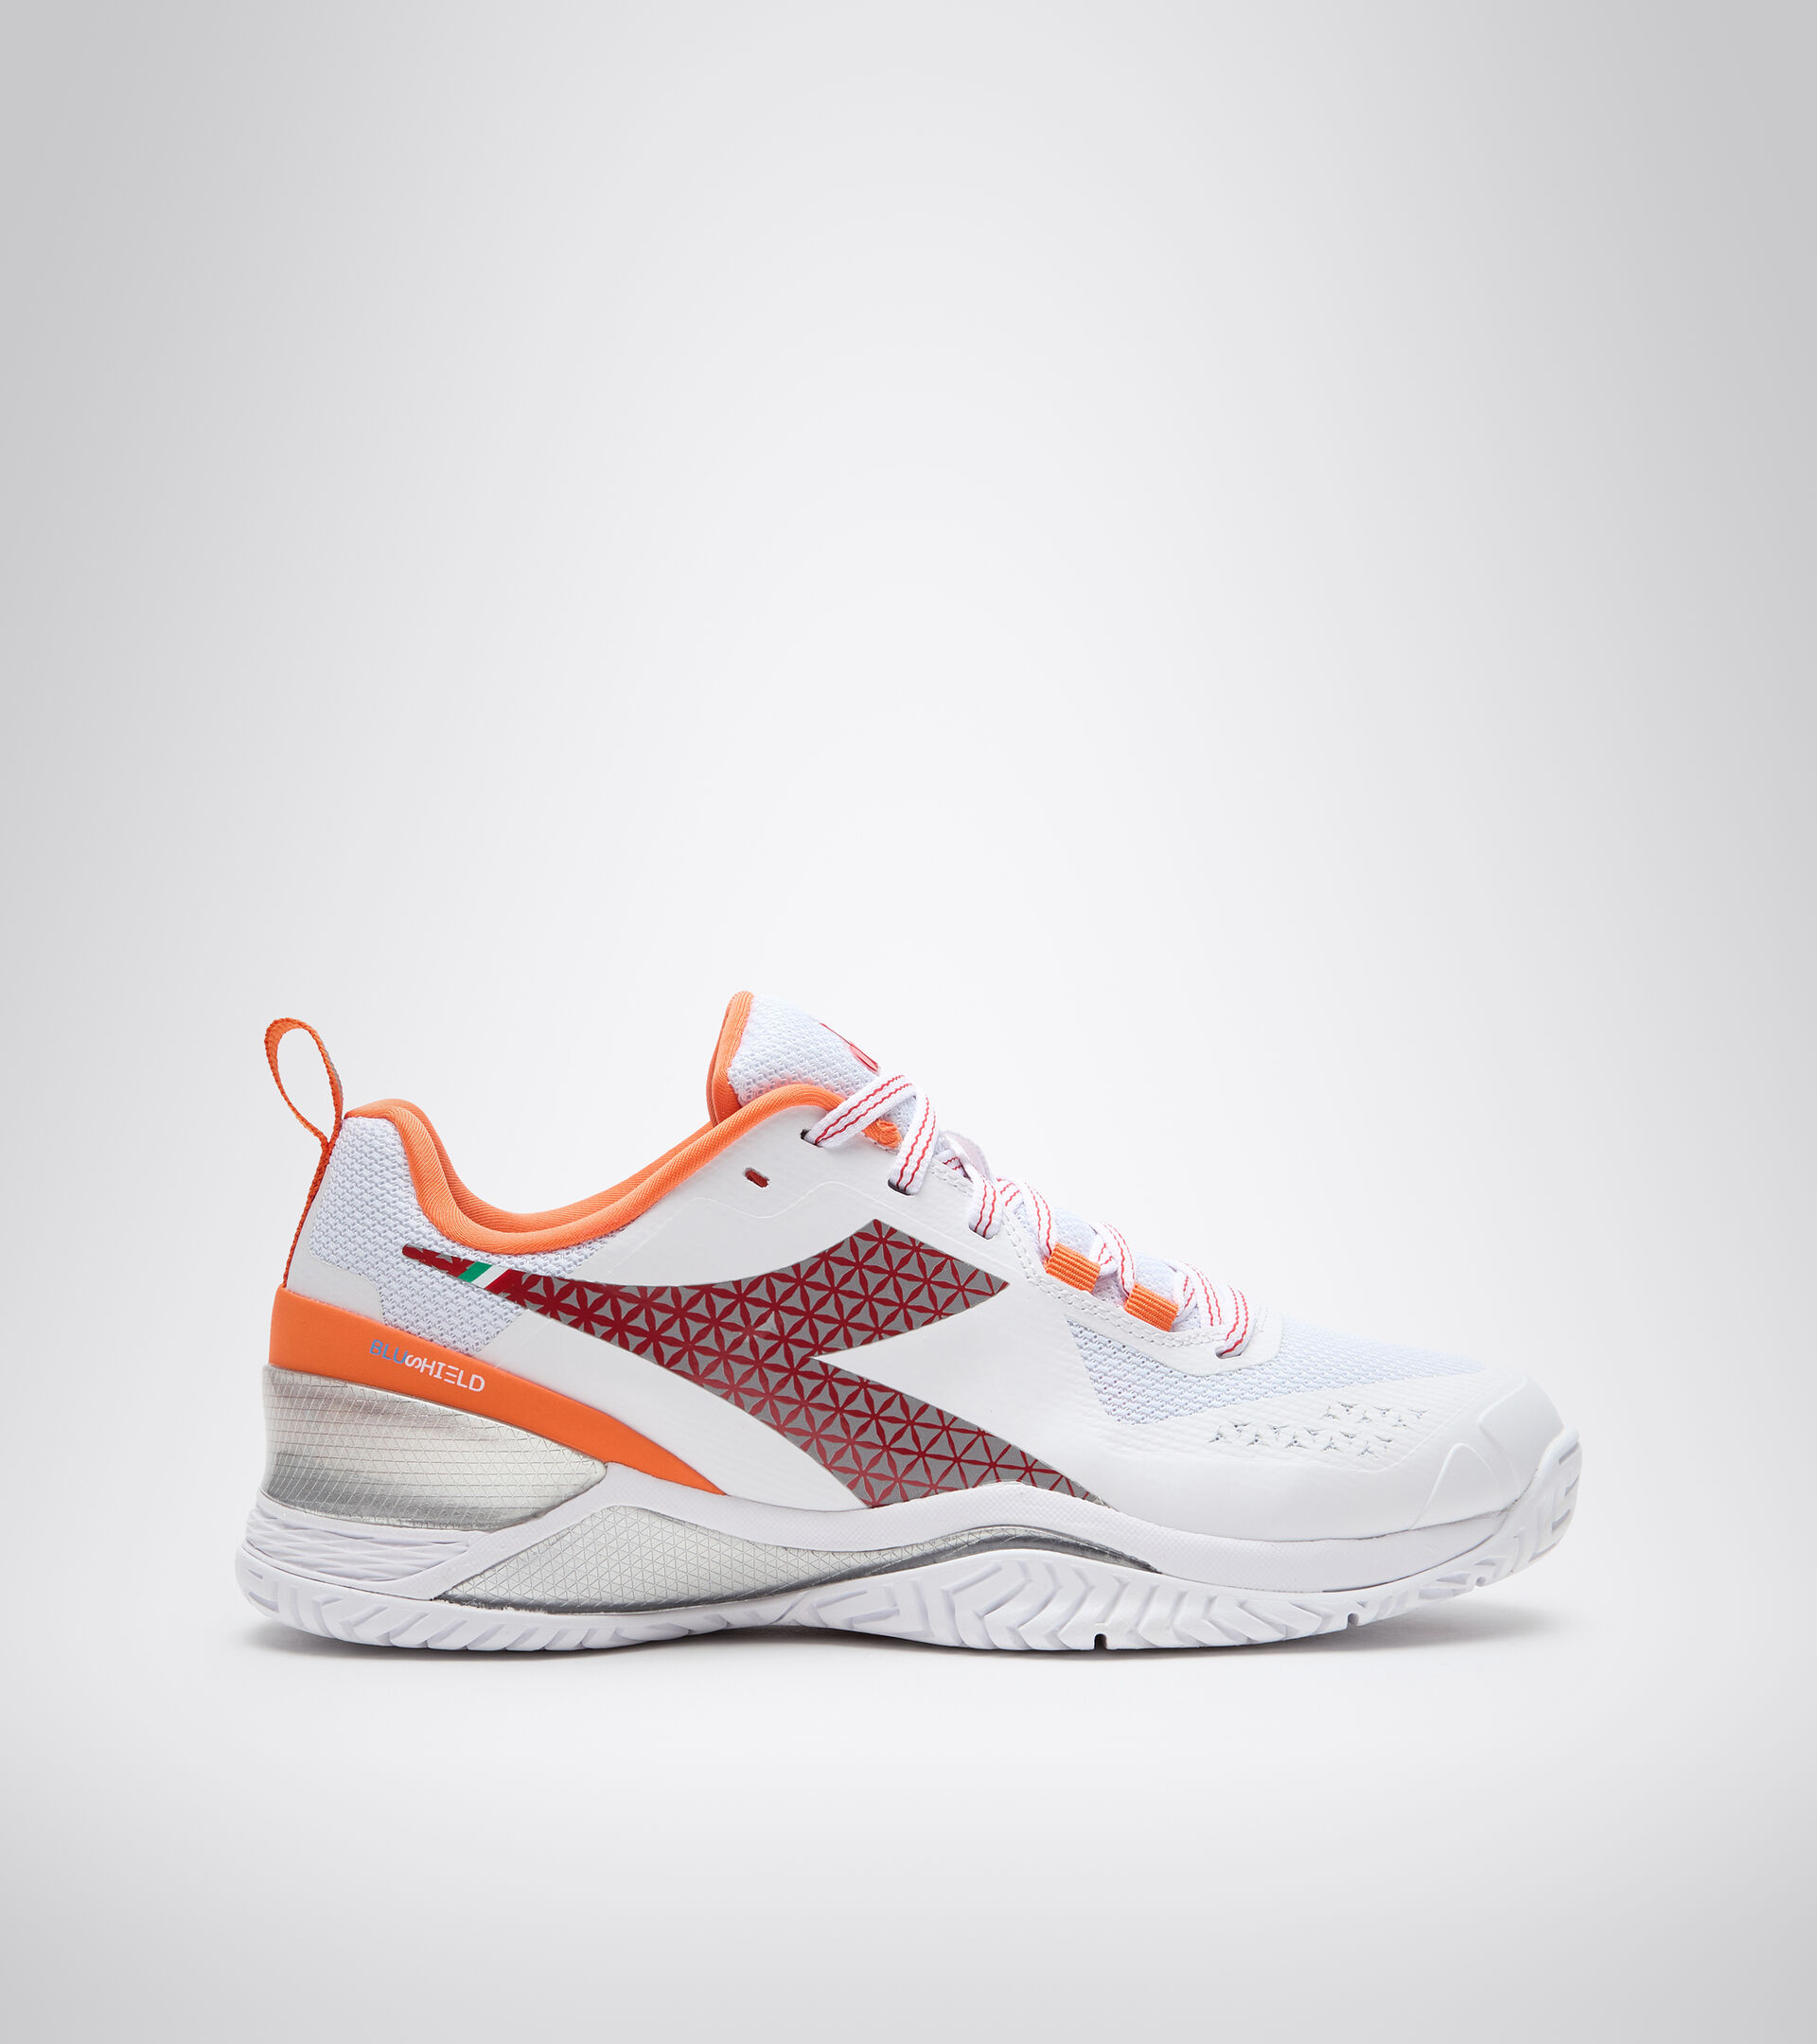 Oven Rationeel Carry BLUSHIELD TORNEO W AG Tennis shoes - Women - Diadora Online Store